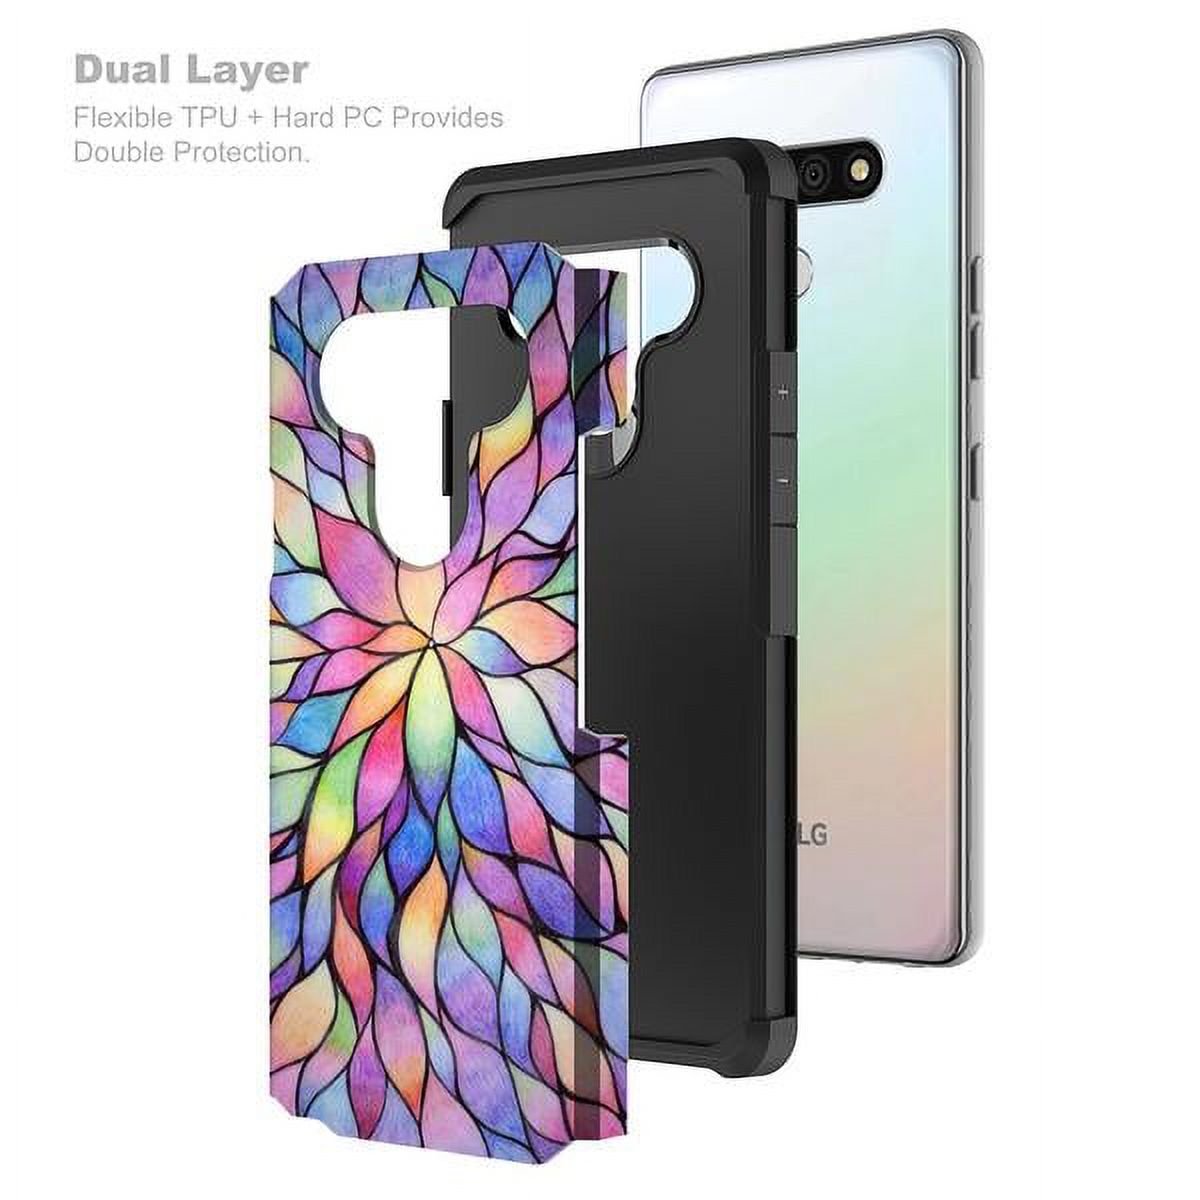 LG Stylo 6/LG Stylo 6 Plus Case Cover w/[ Temper Glass Screen Protector] Silicone Shock Proof Dual Layer Cute Girls Women Case Cover for LG Stylo 6/Stylo 6 Plus - Rainbow Flower - image 5 of 5